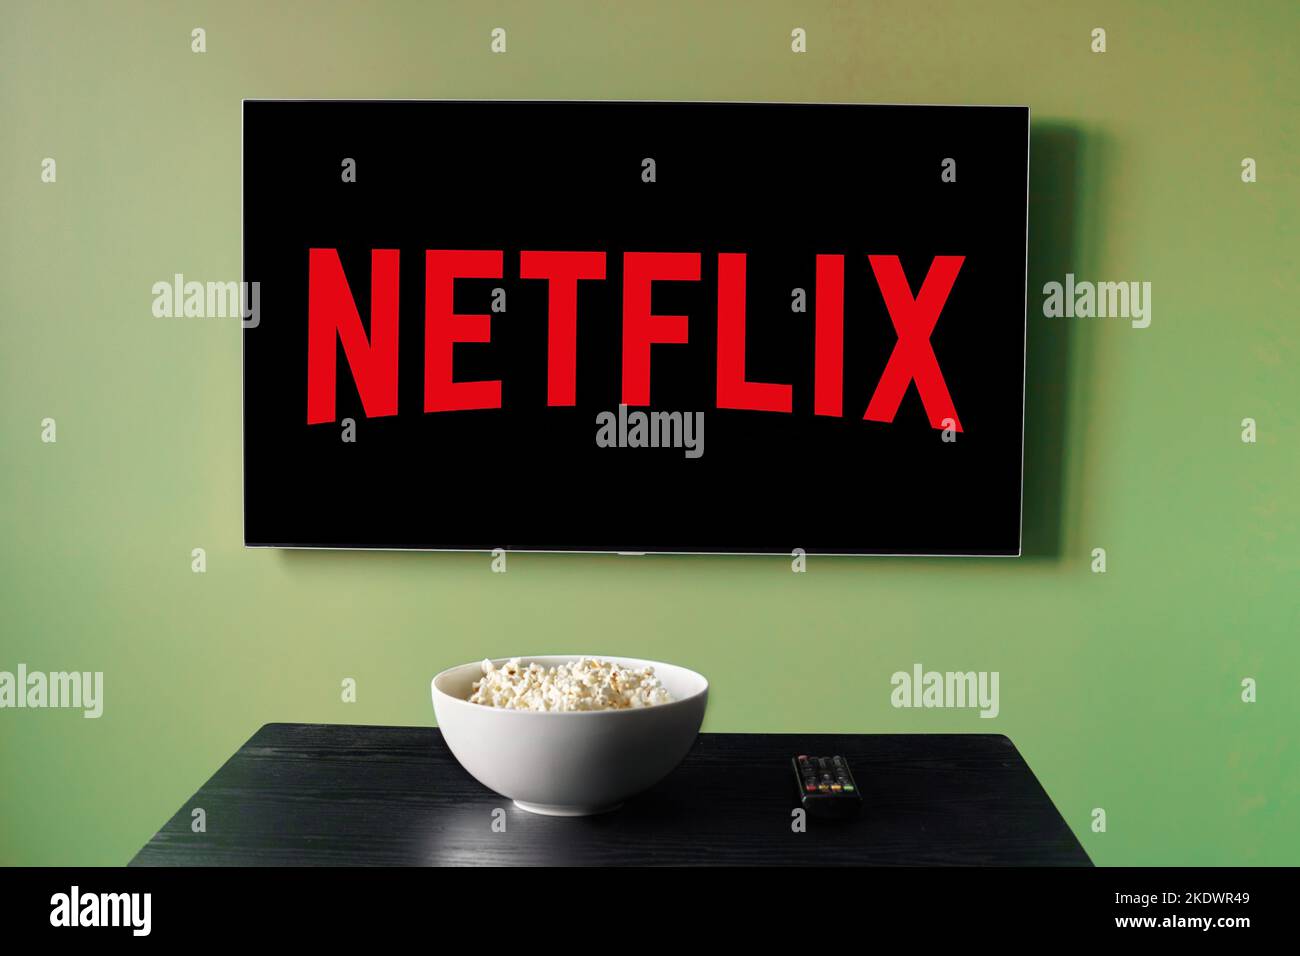 TV Television with Netflix logo on screen. Stock Photo